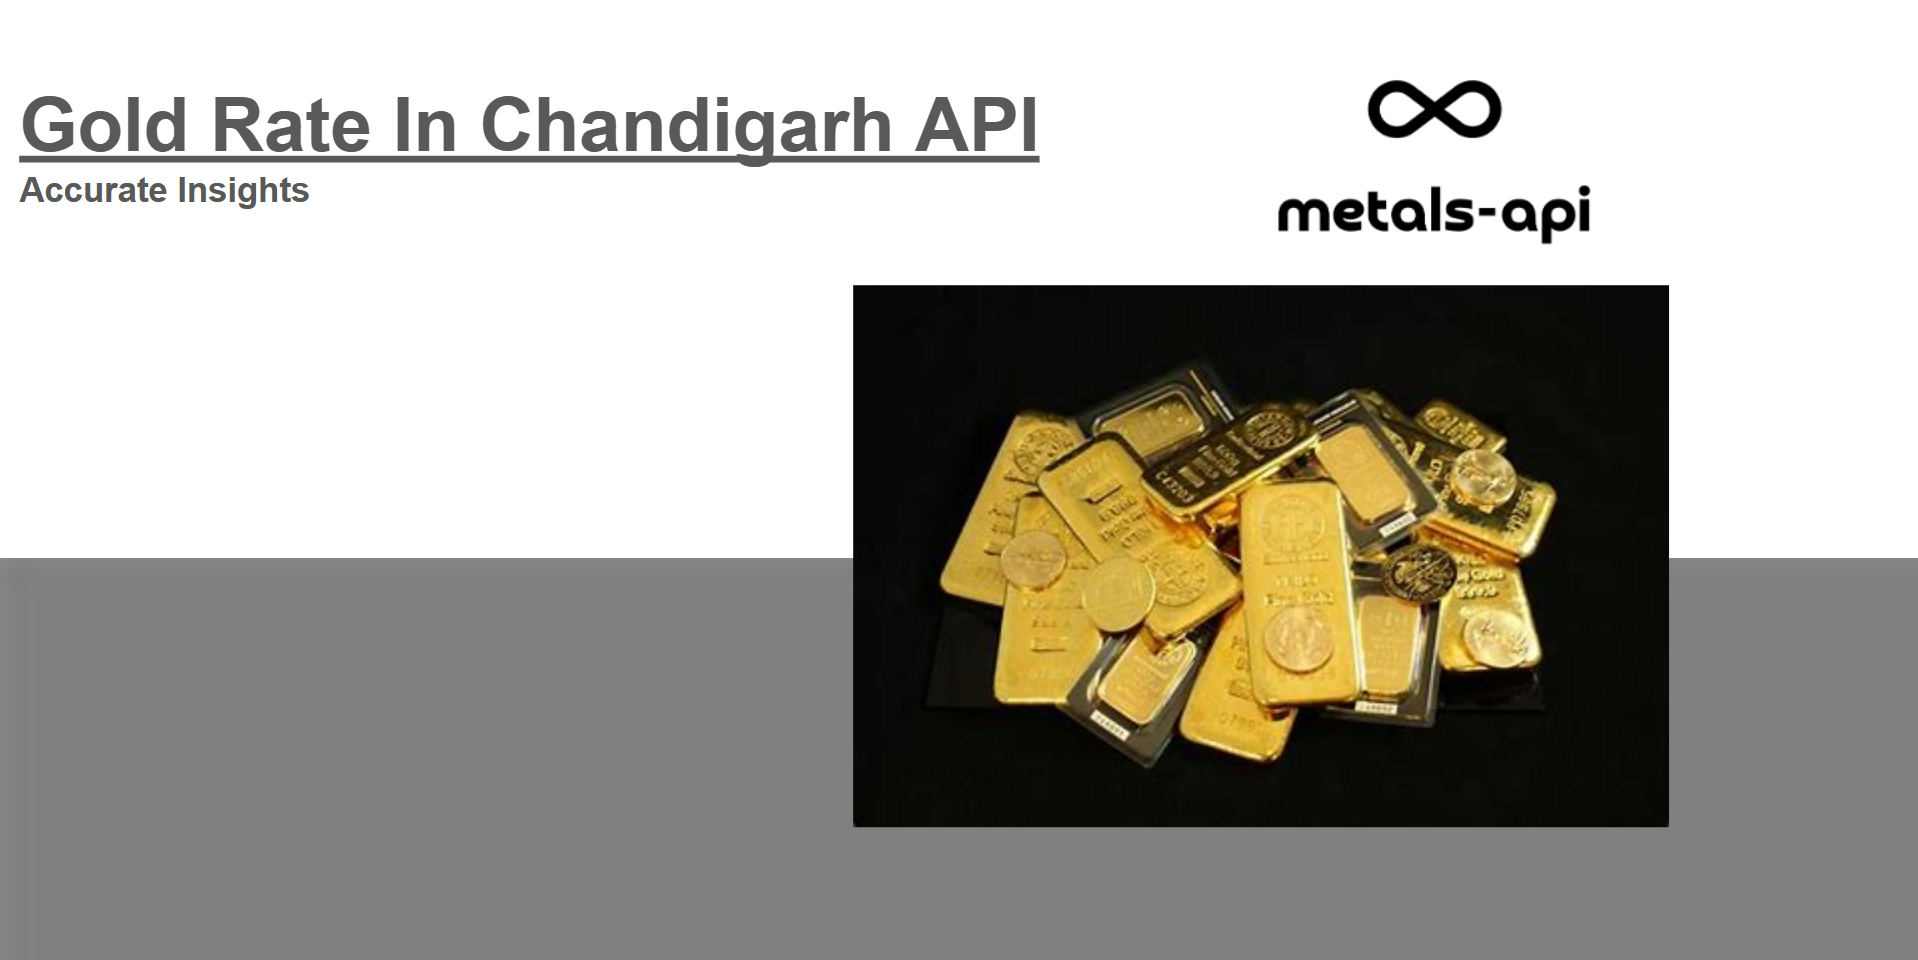 Gold Rate In Chandigarh API: Accurate Insights